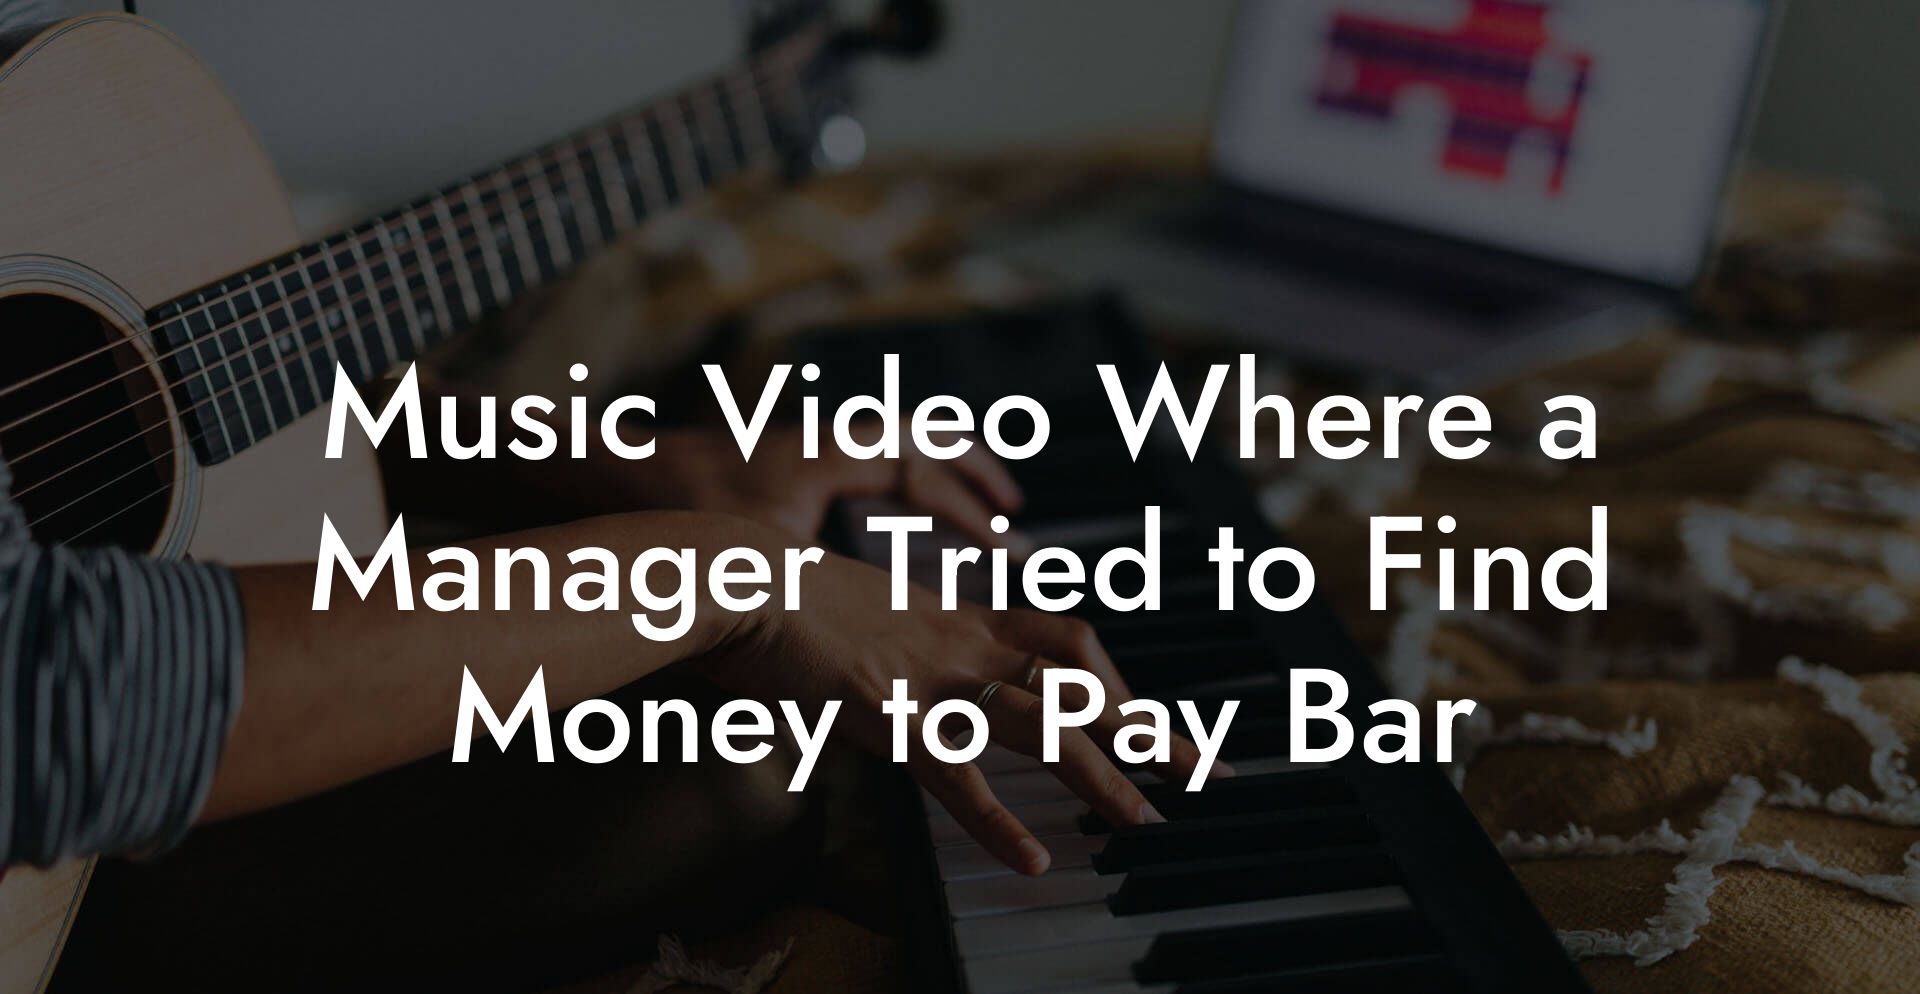 Music Video Where a Manager Tried to Find Money to Pay Bar